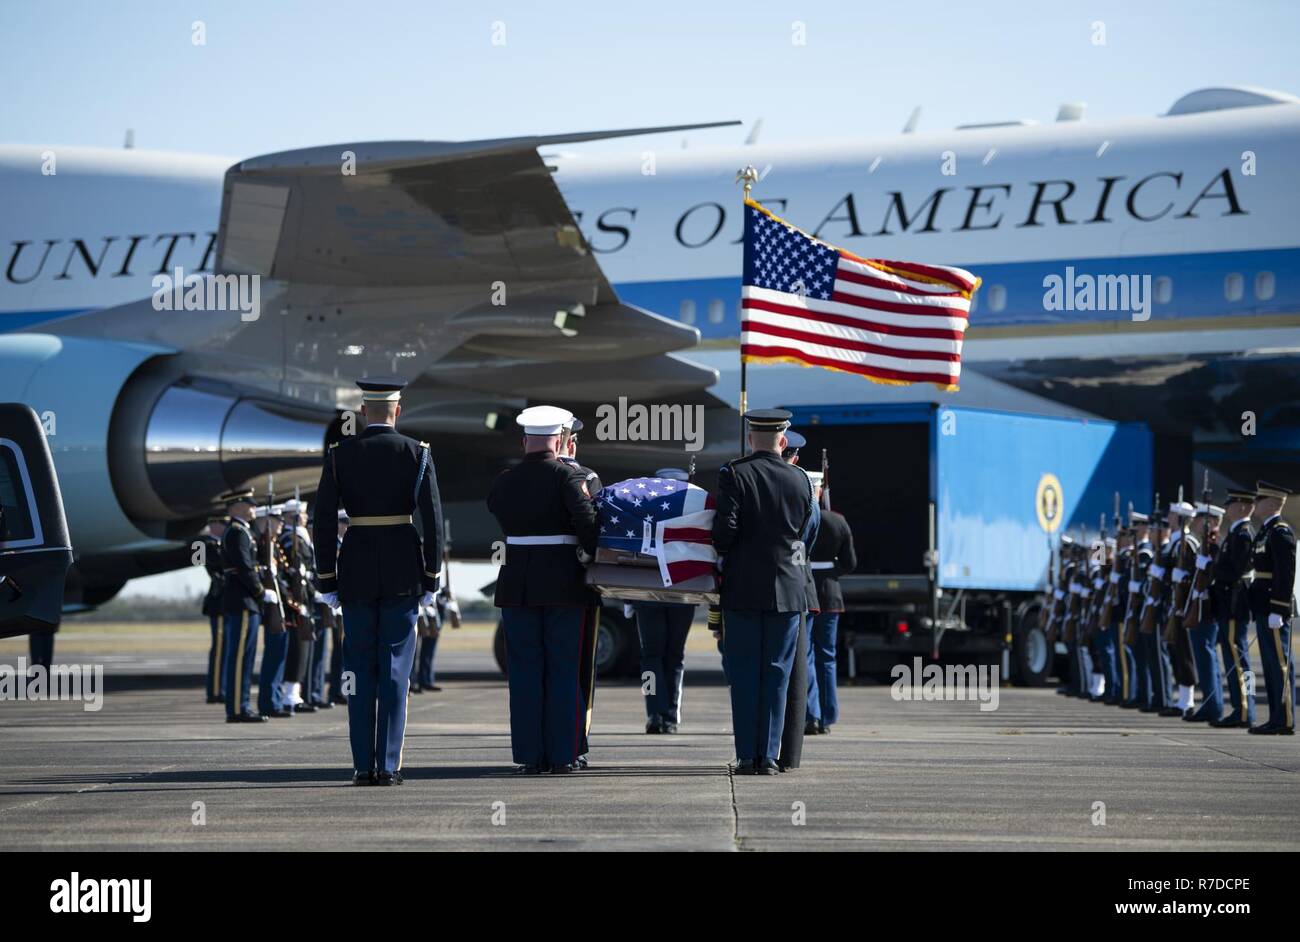 U.S. service members with the Joint Forces Honor Guard carry the casket of former U.S. President George H.W. Bush to an Air Force VC-25 aircraft during a departure ceremony at Ellington Field Joint Reserve Base in Houston, Texas, Dec. 3, 2018. Nearly 4,000 military and civilian personnel from across all branches of the U.S. armed forces, including Reserve and National Guard components, provided ceremonial support during the state funeral of George H.W. Bush, the 41st President of the United States. Stock Photo